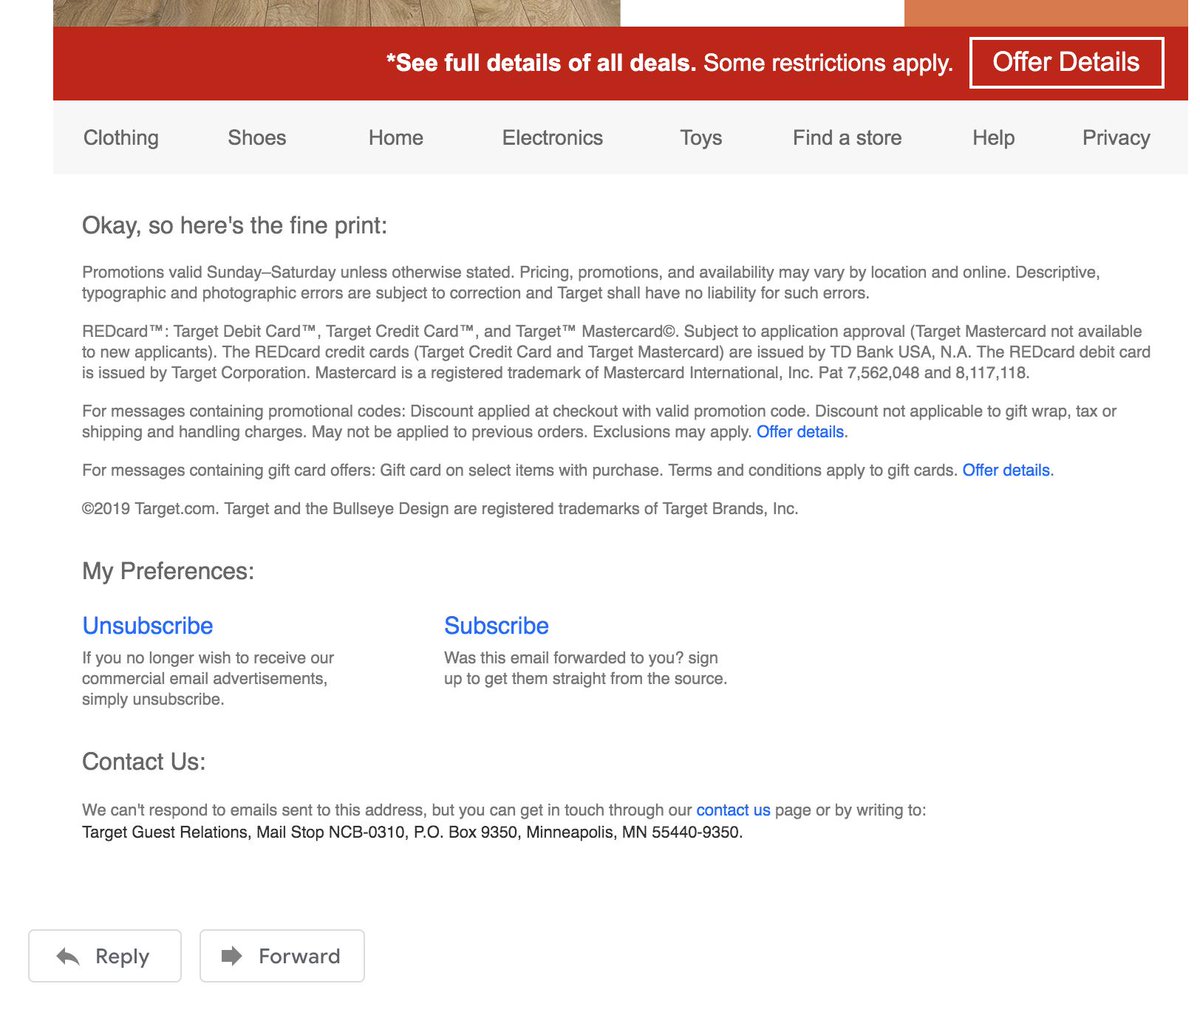  #delightful_design_details 24Delight is measured relatively.  @Target avoided the oft-used dark pattern of obscuring the Unsubscribe link in their emails.The link is large, easy to find, and shows they respect users' decision. Delightful because different and thoughtful.